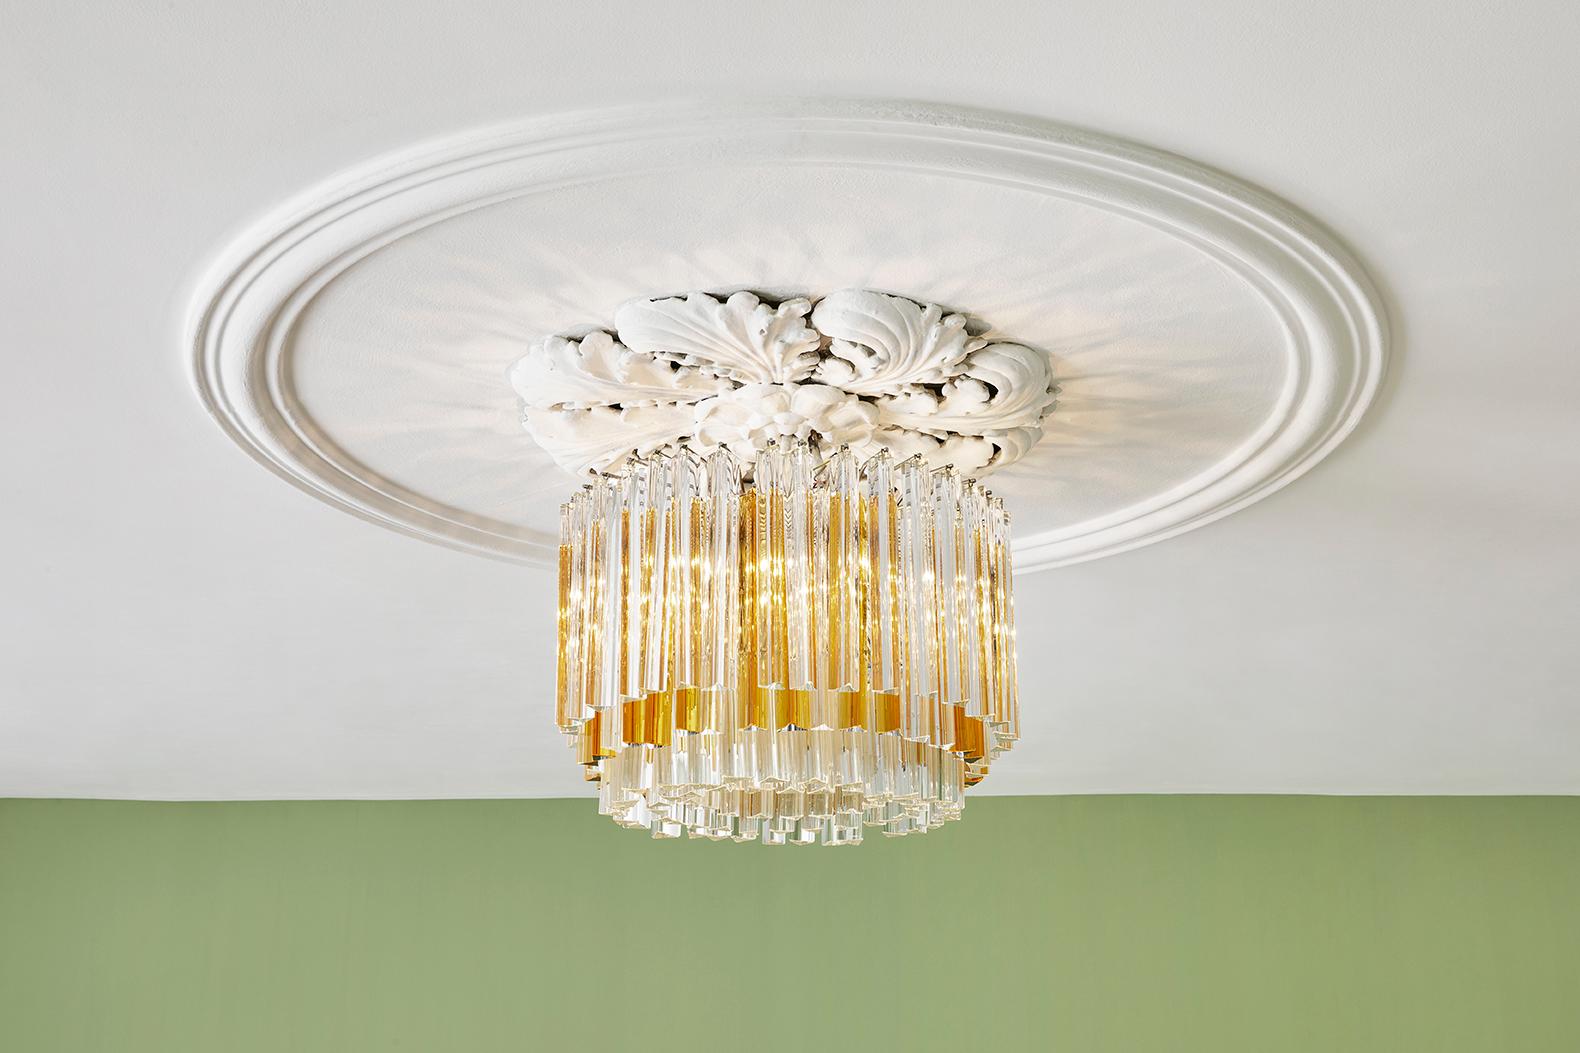 Murano chandelier 
Italy, 1960s

Murano glass chandelier with clear and a couple of Amber tinted glass rods.

Measures: H 48 x 60 Ø cm.
 